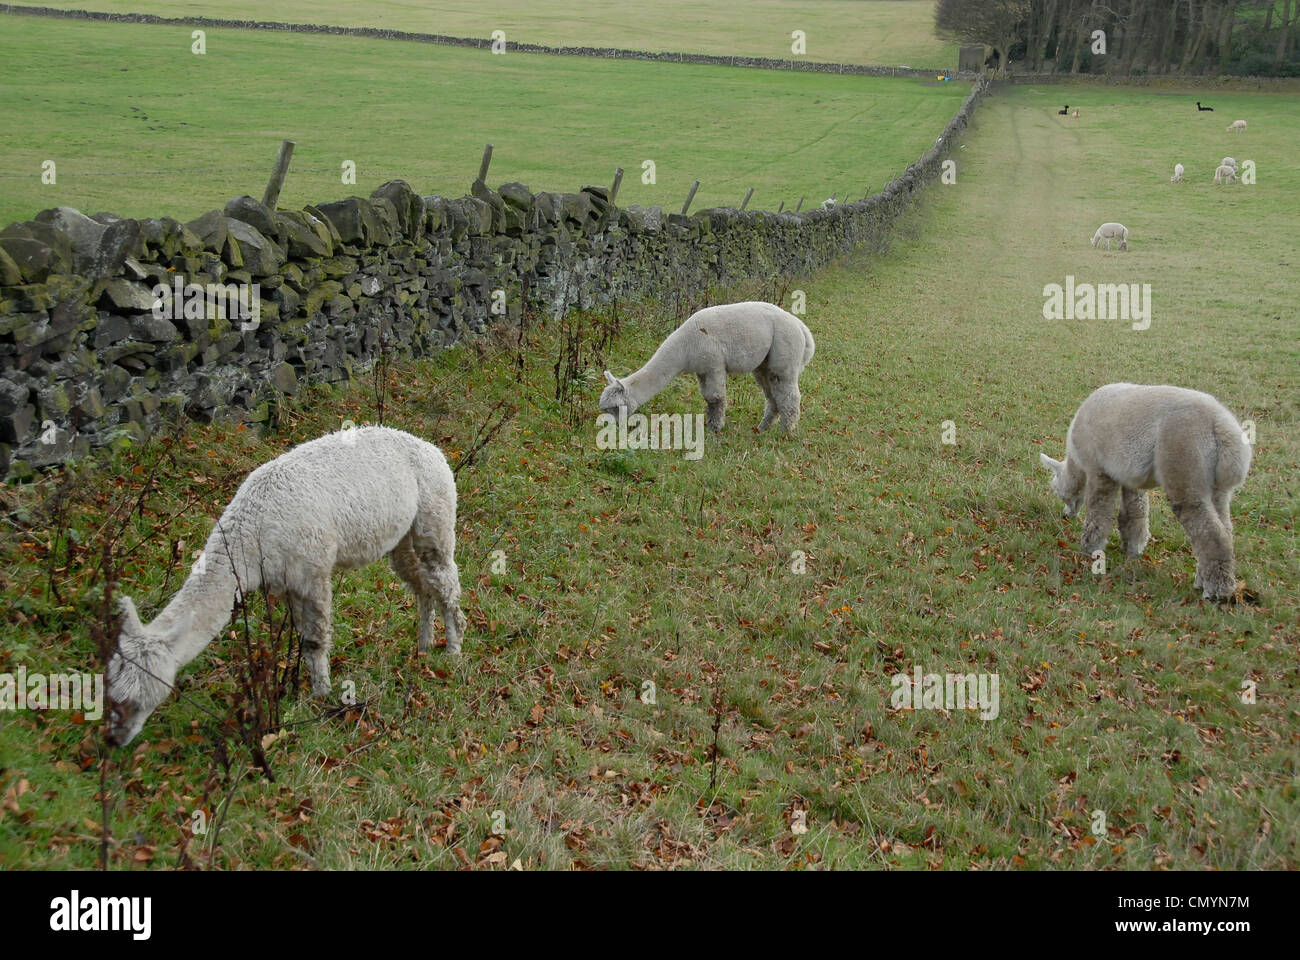 Part of a alpaca herd grazing in the corner of an English field. Stock Photo